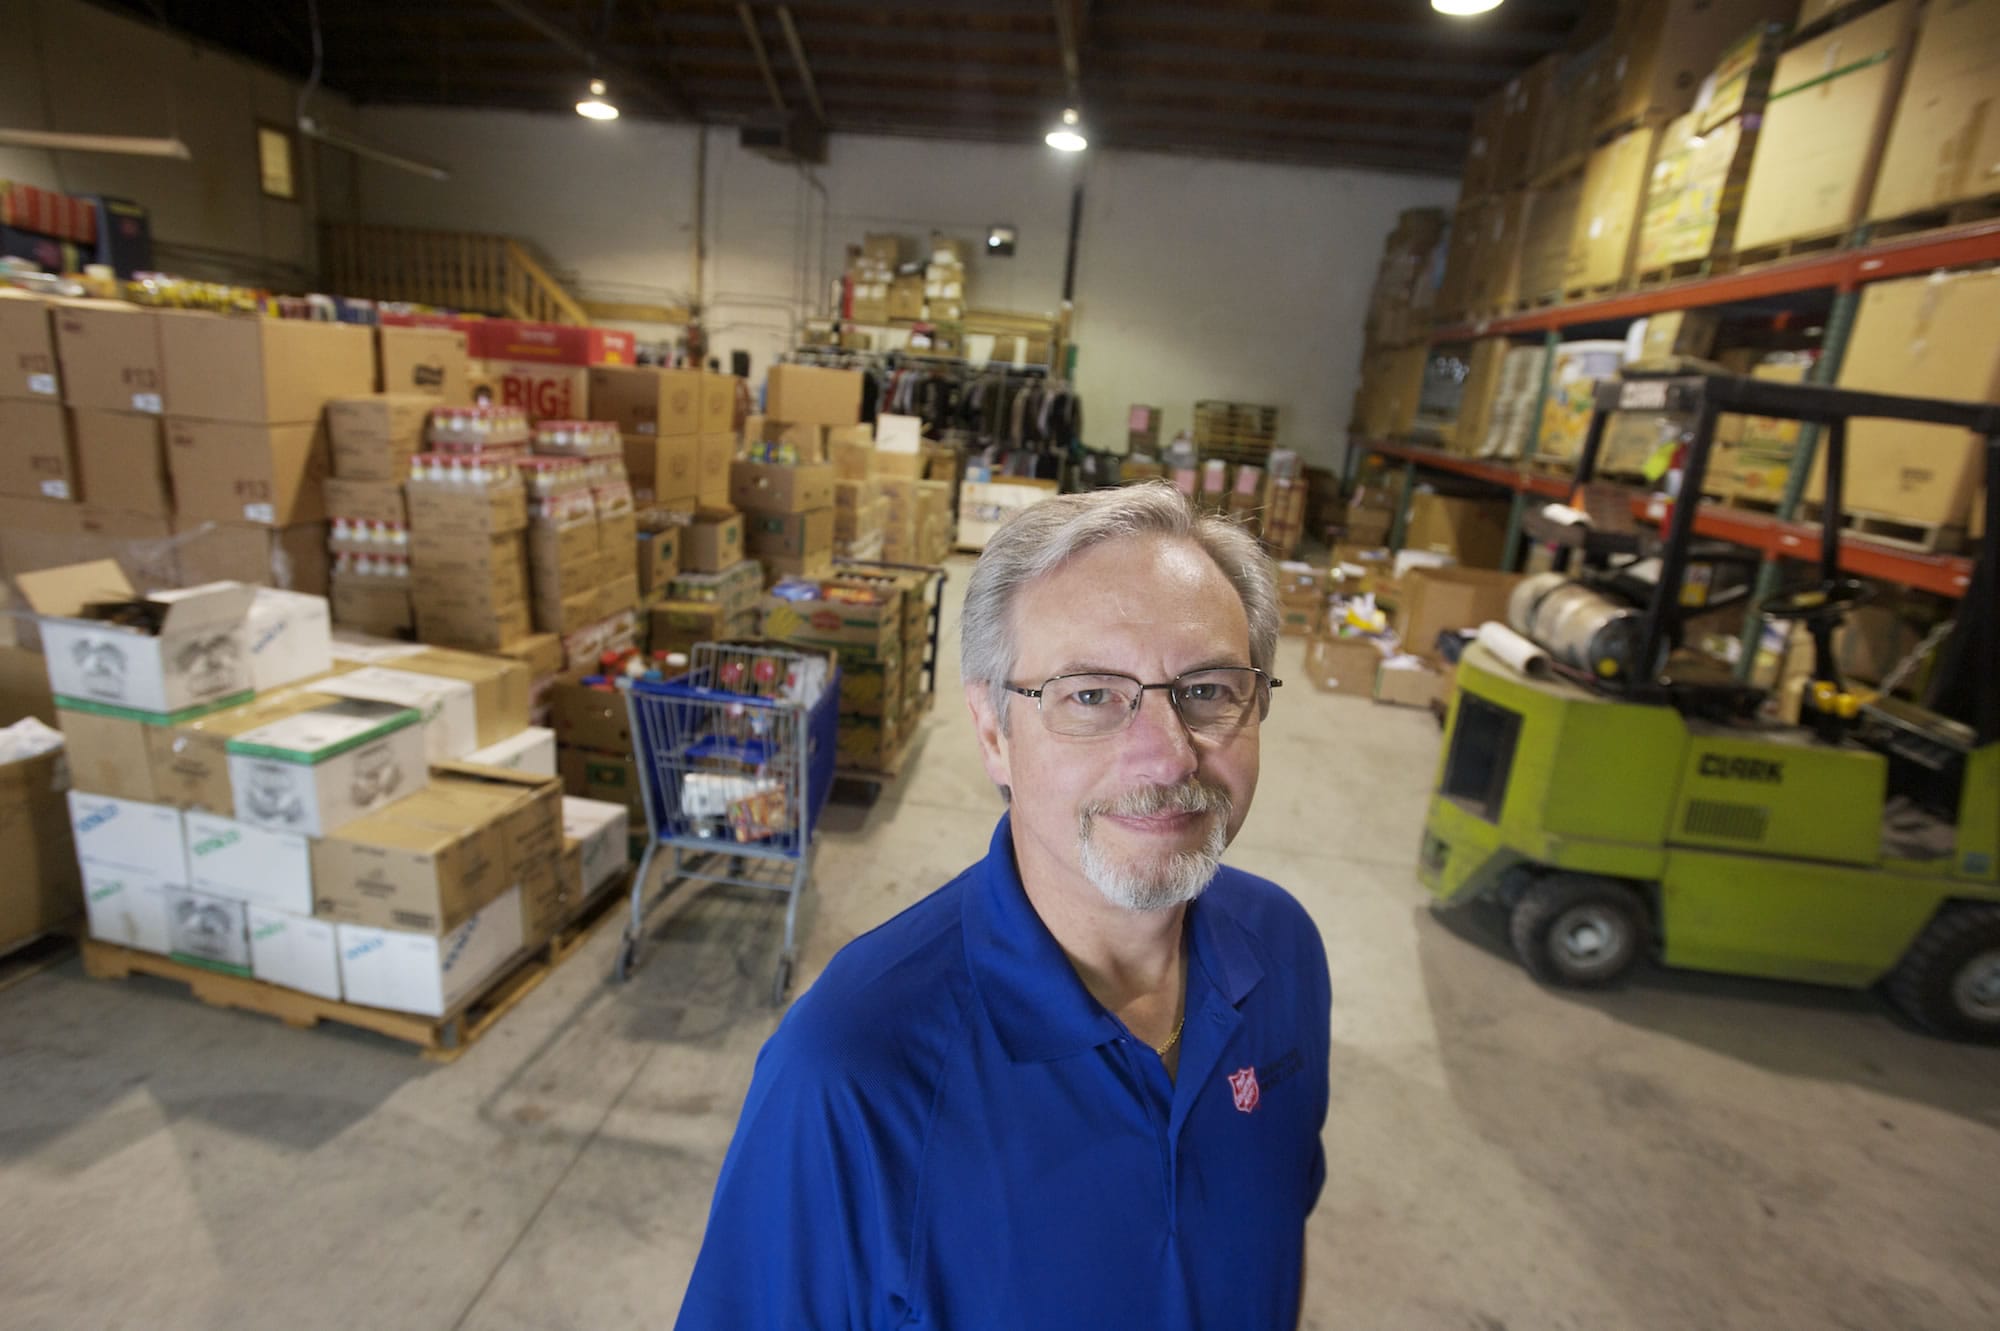 Salvation Army administrator Steve Rusk spent 18 years growing the local food bank into its own standalone agency.